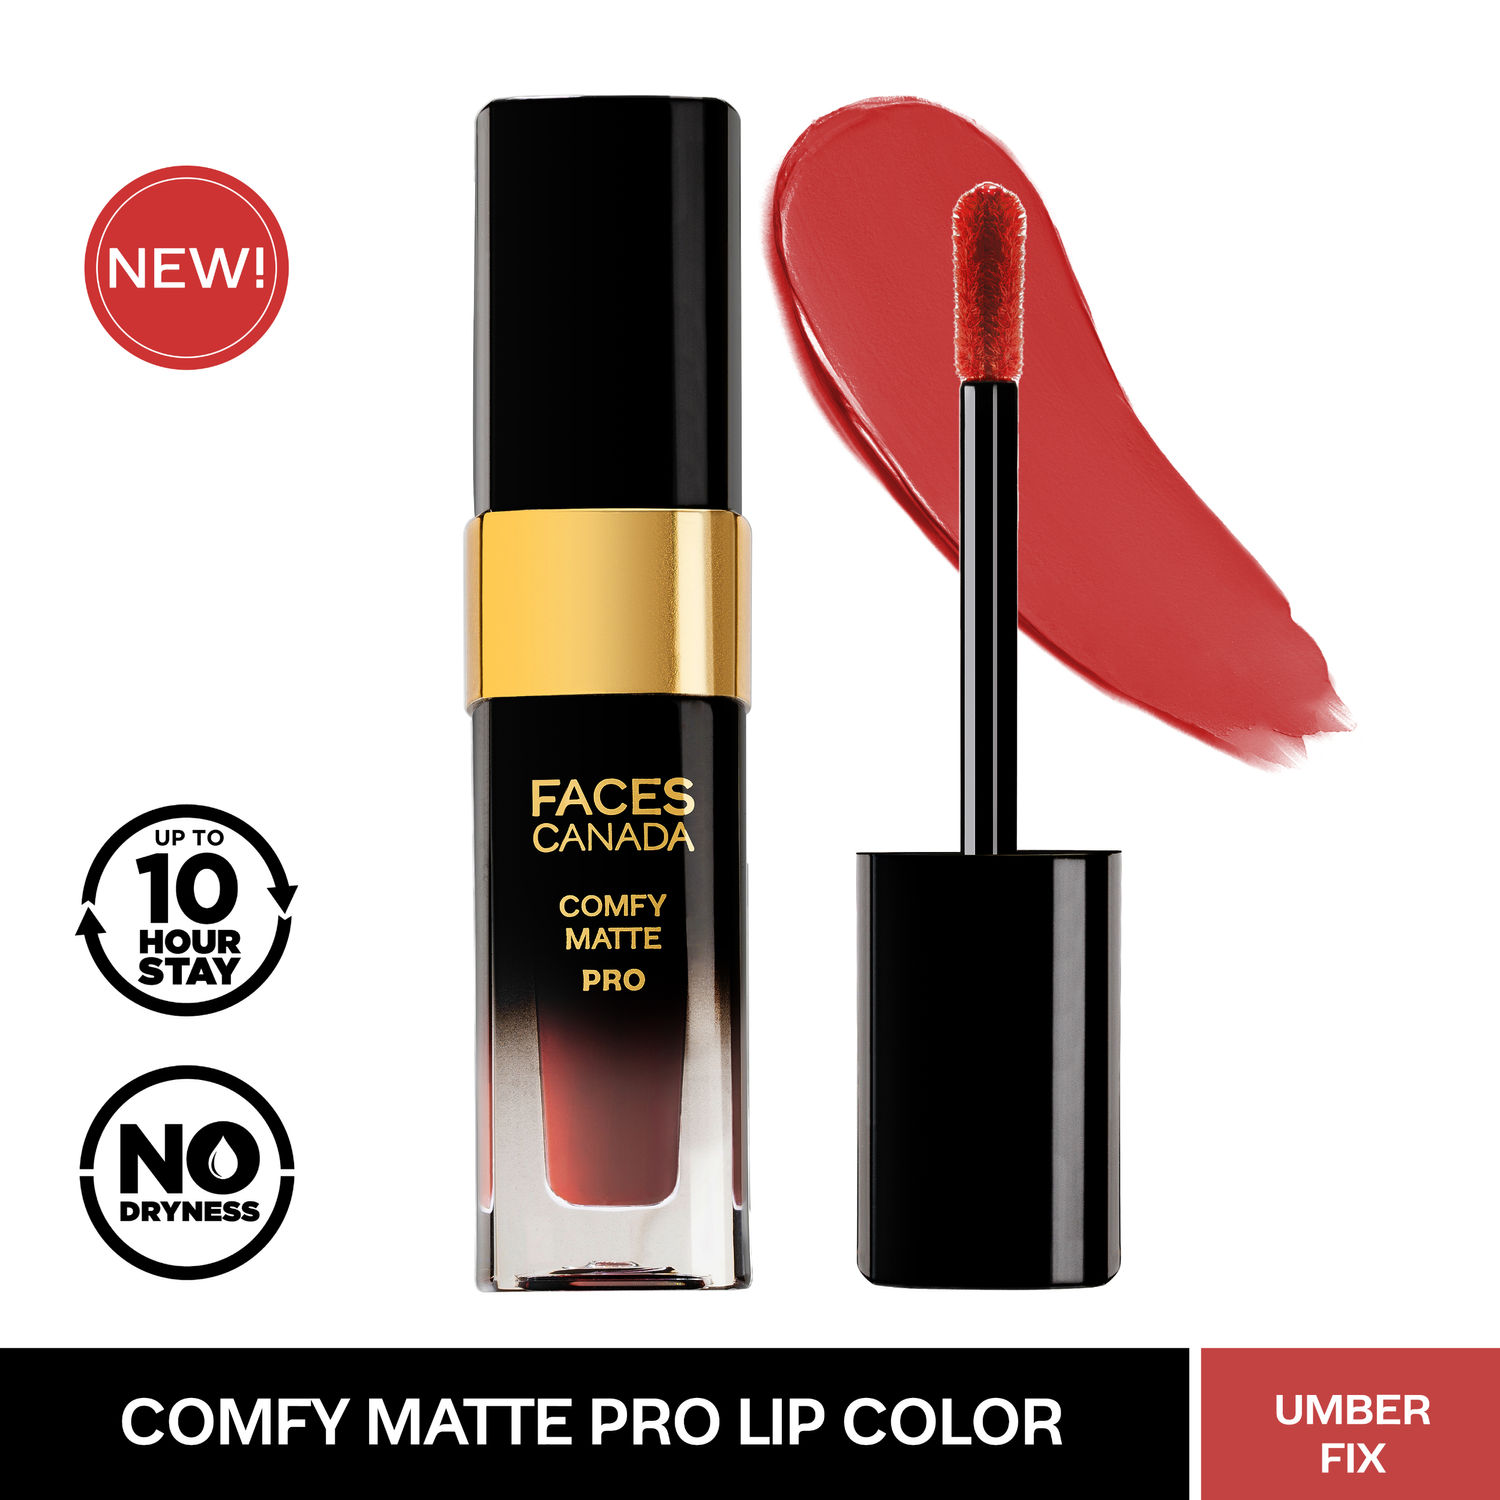 Buy FACES CANADA Comfy Matte Pro Liquid Lipstick - Umber Fix 10, 5.5 ml | 10HR Longstay | Intense Color | Macadamia Oil & Olive Butter Infused | Lightweight Super Smooth | No Dryness | No Alcohol - Purplle